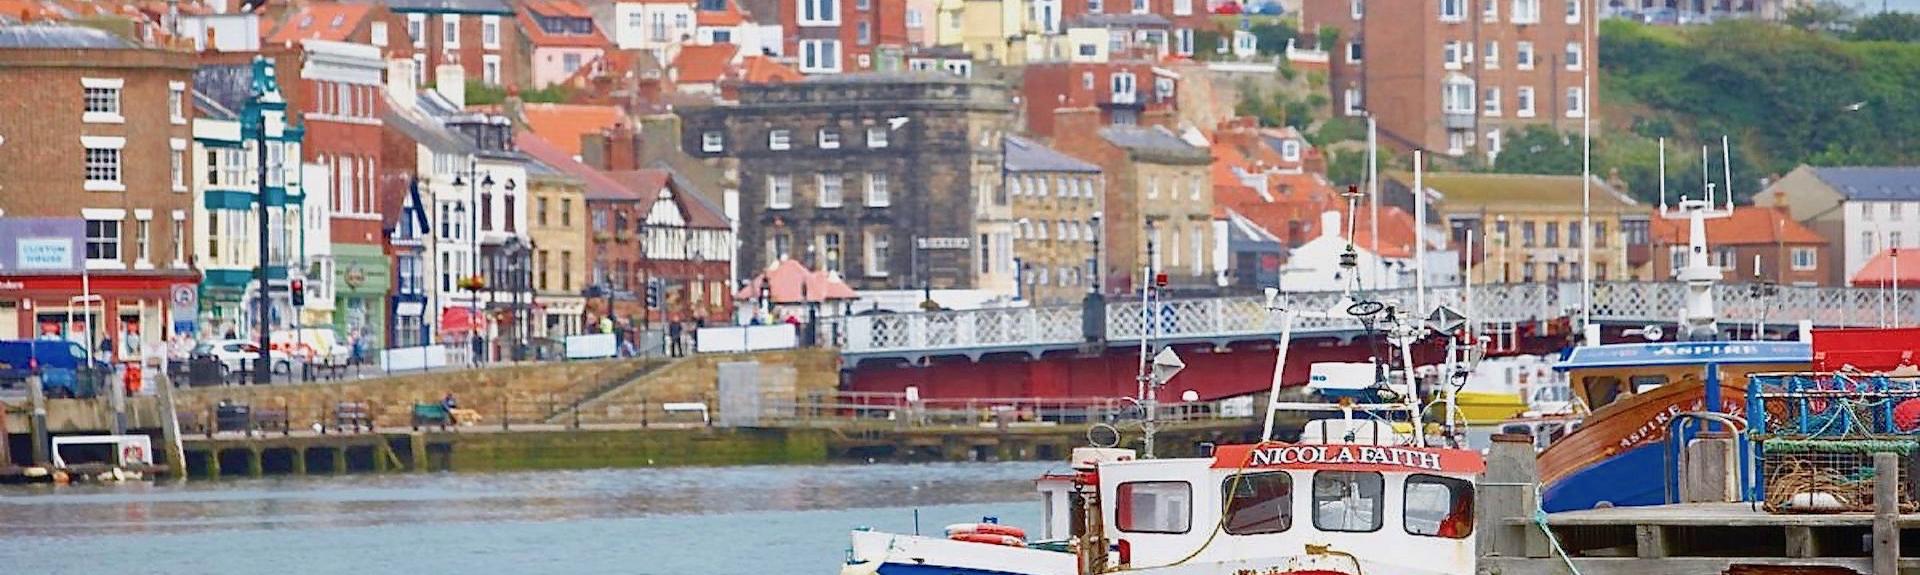 Book Coastal Cottages in Whitby